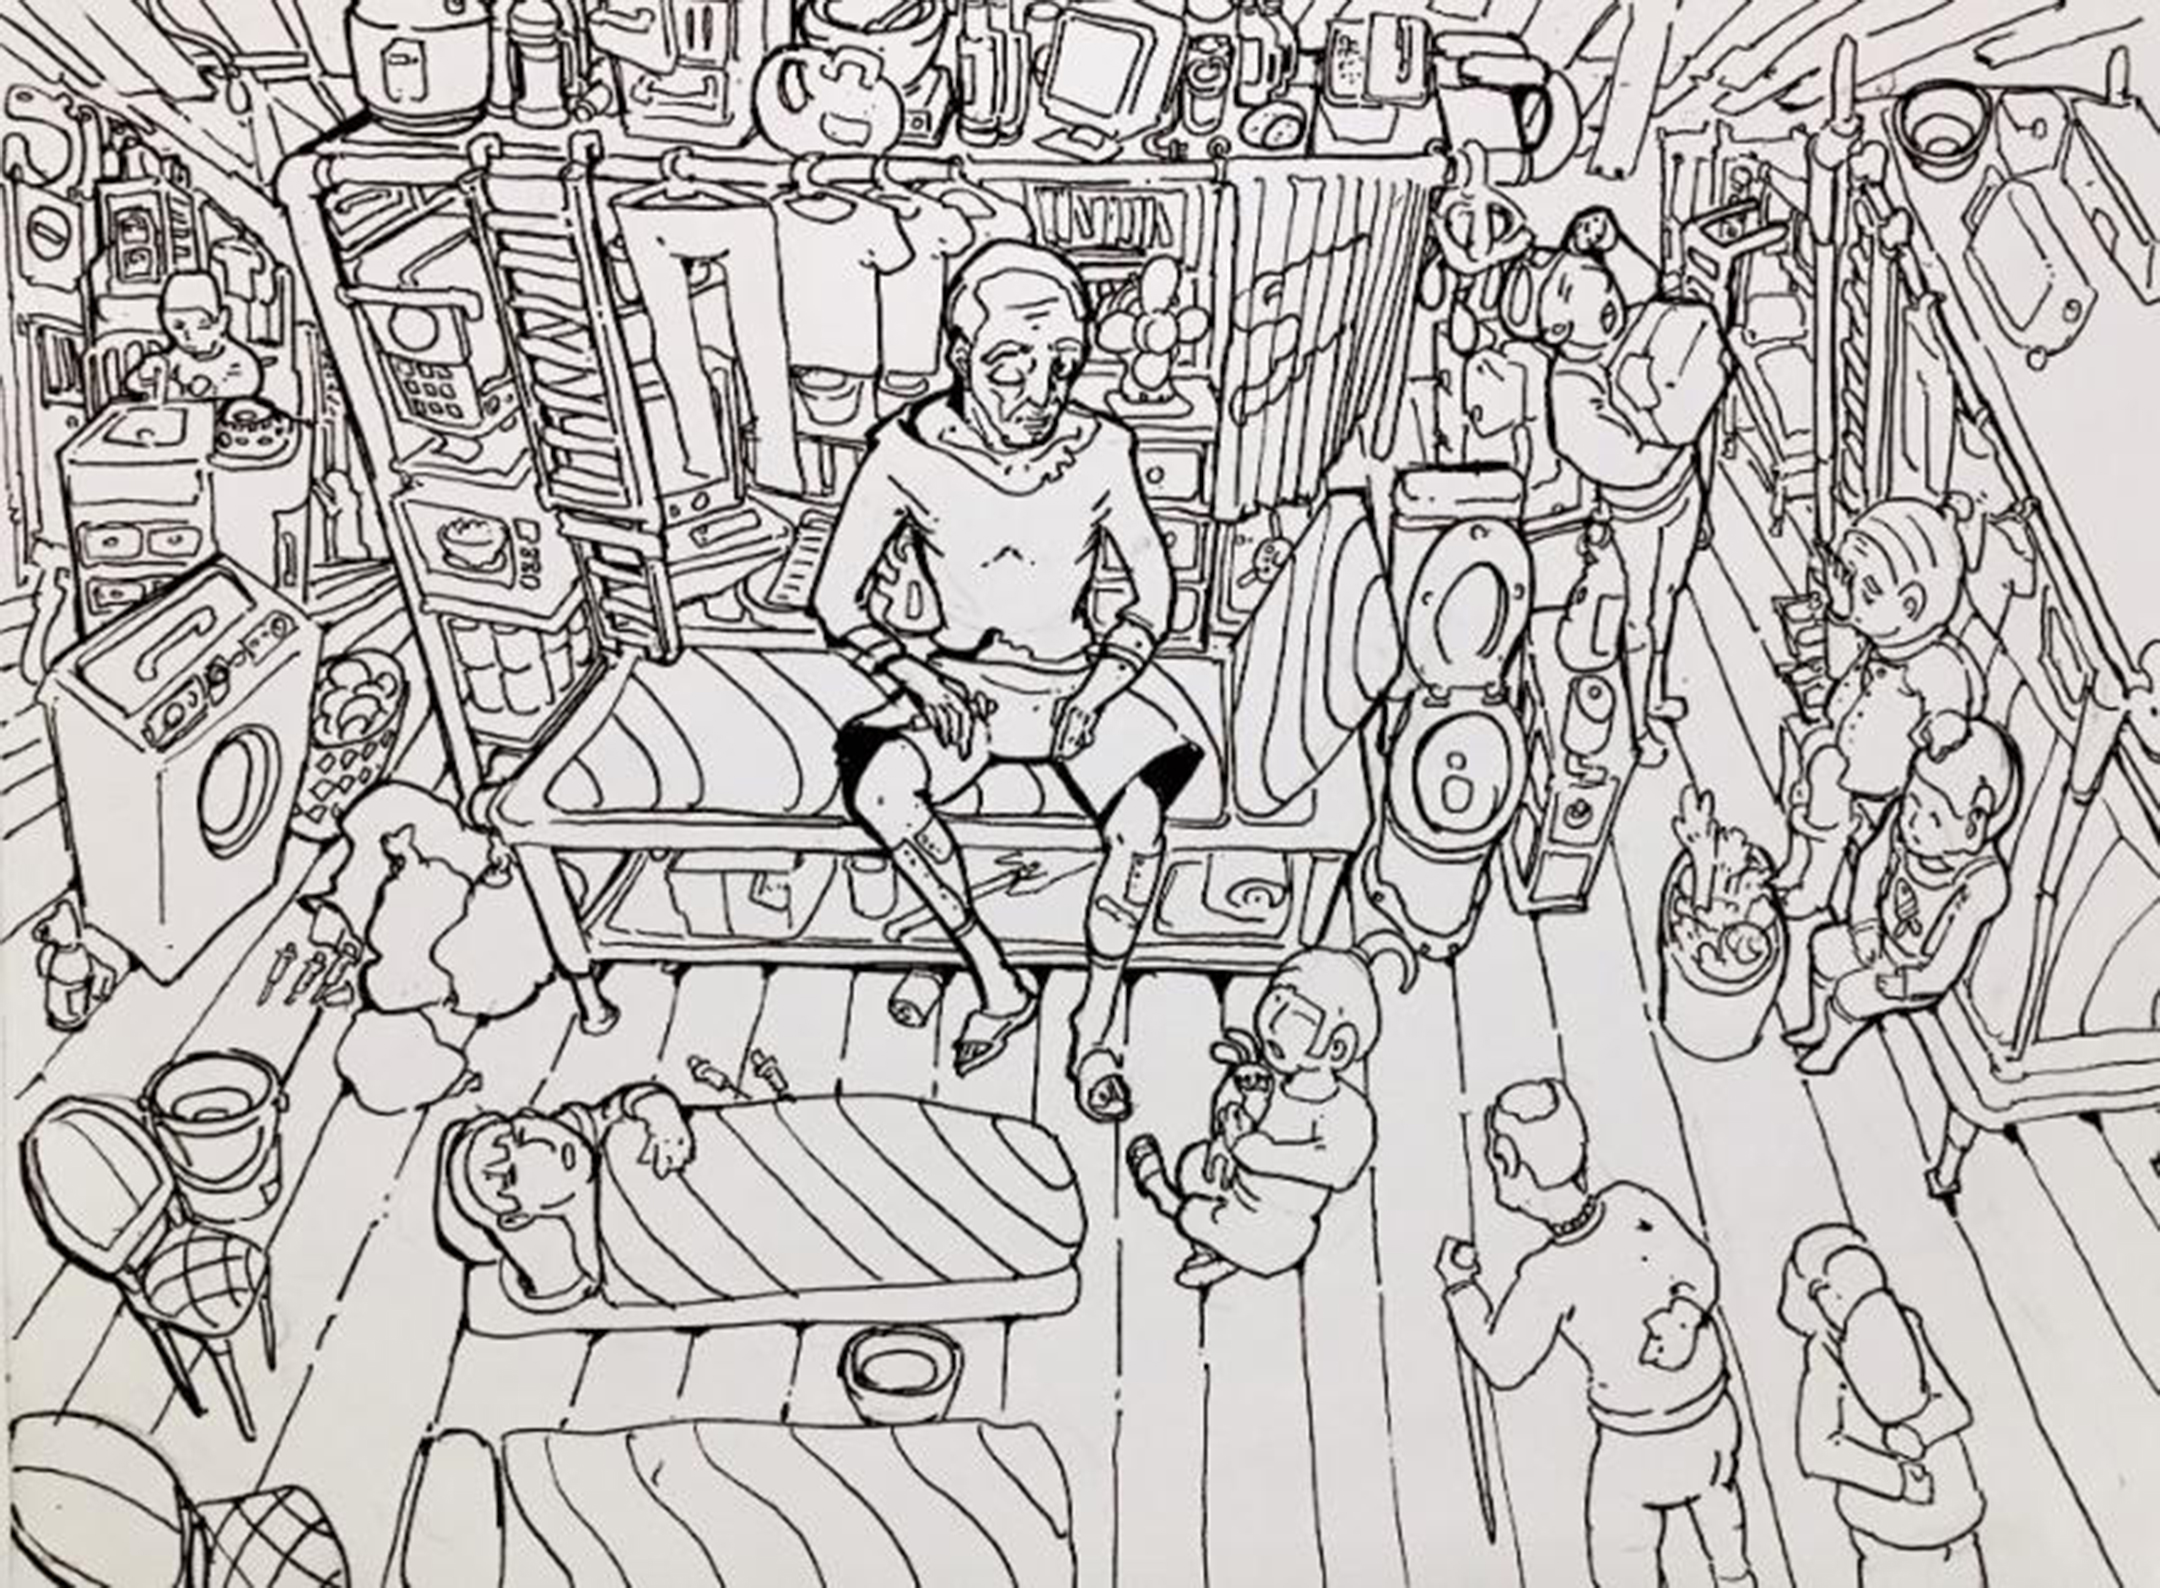 Black and white drawing of an emaciated man sitting on a bed in a crowded room